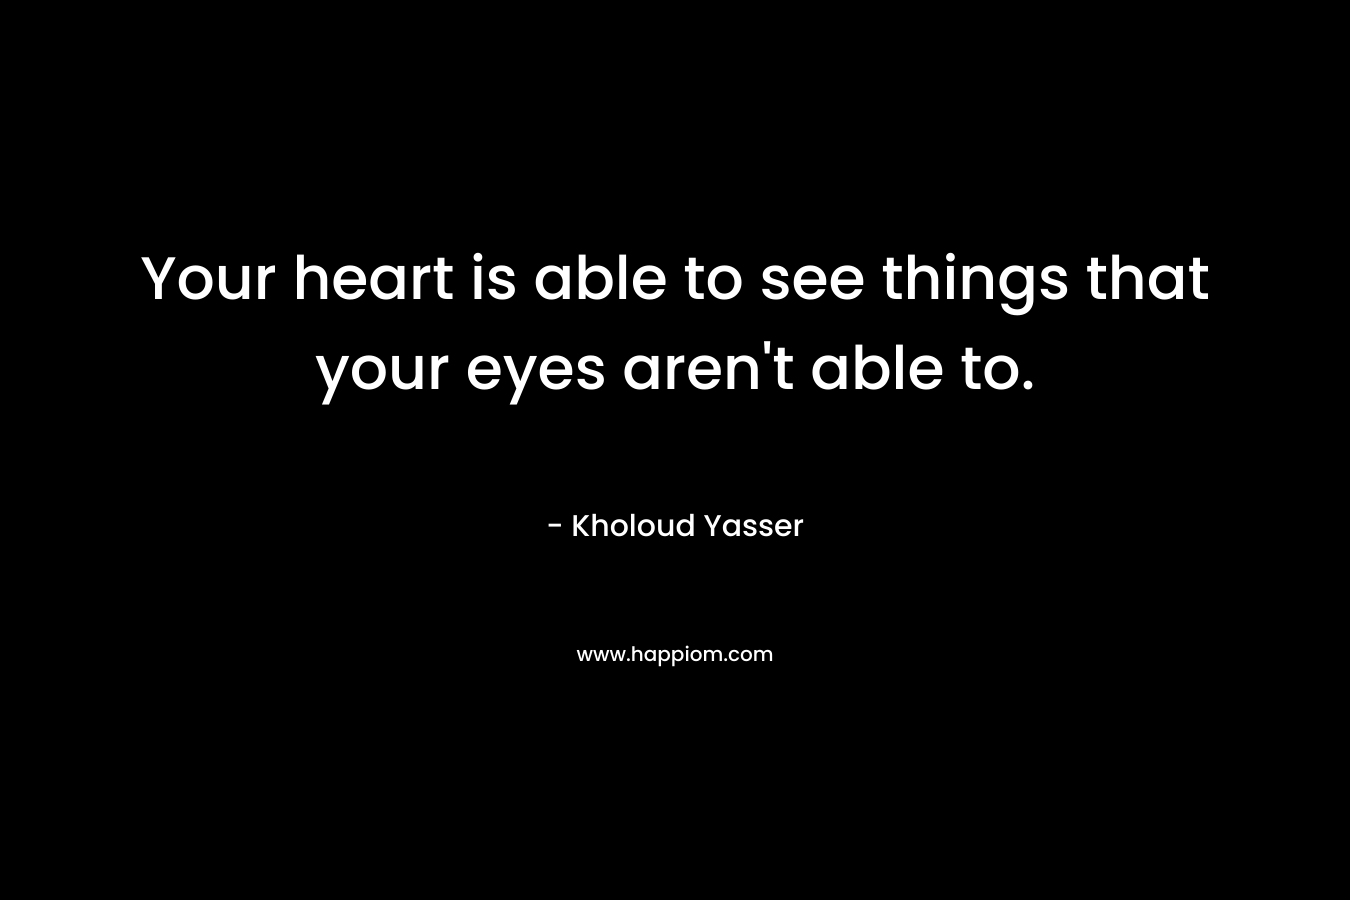 Your heart is able to see things that your eyes aren't able to.